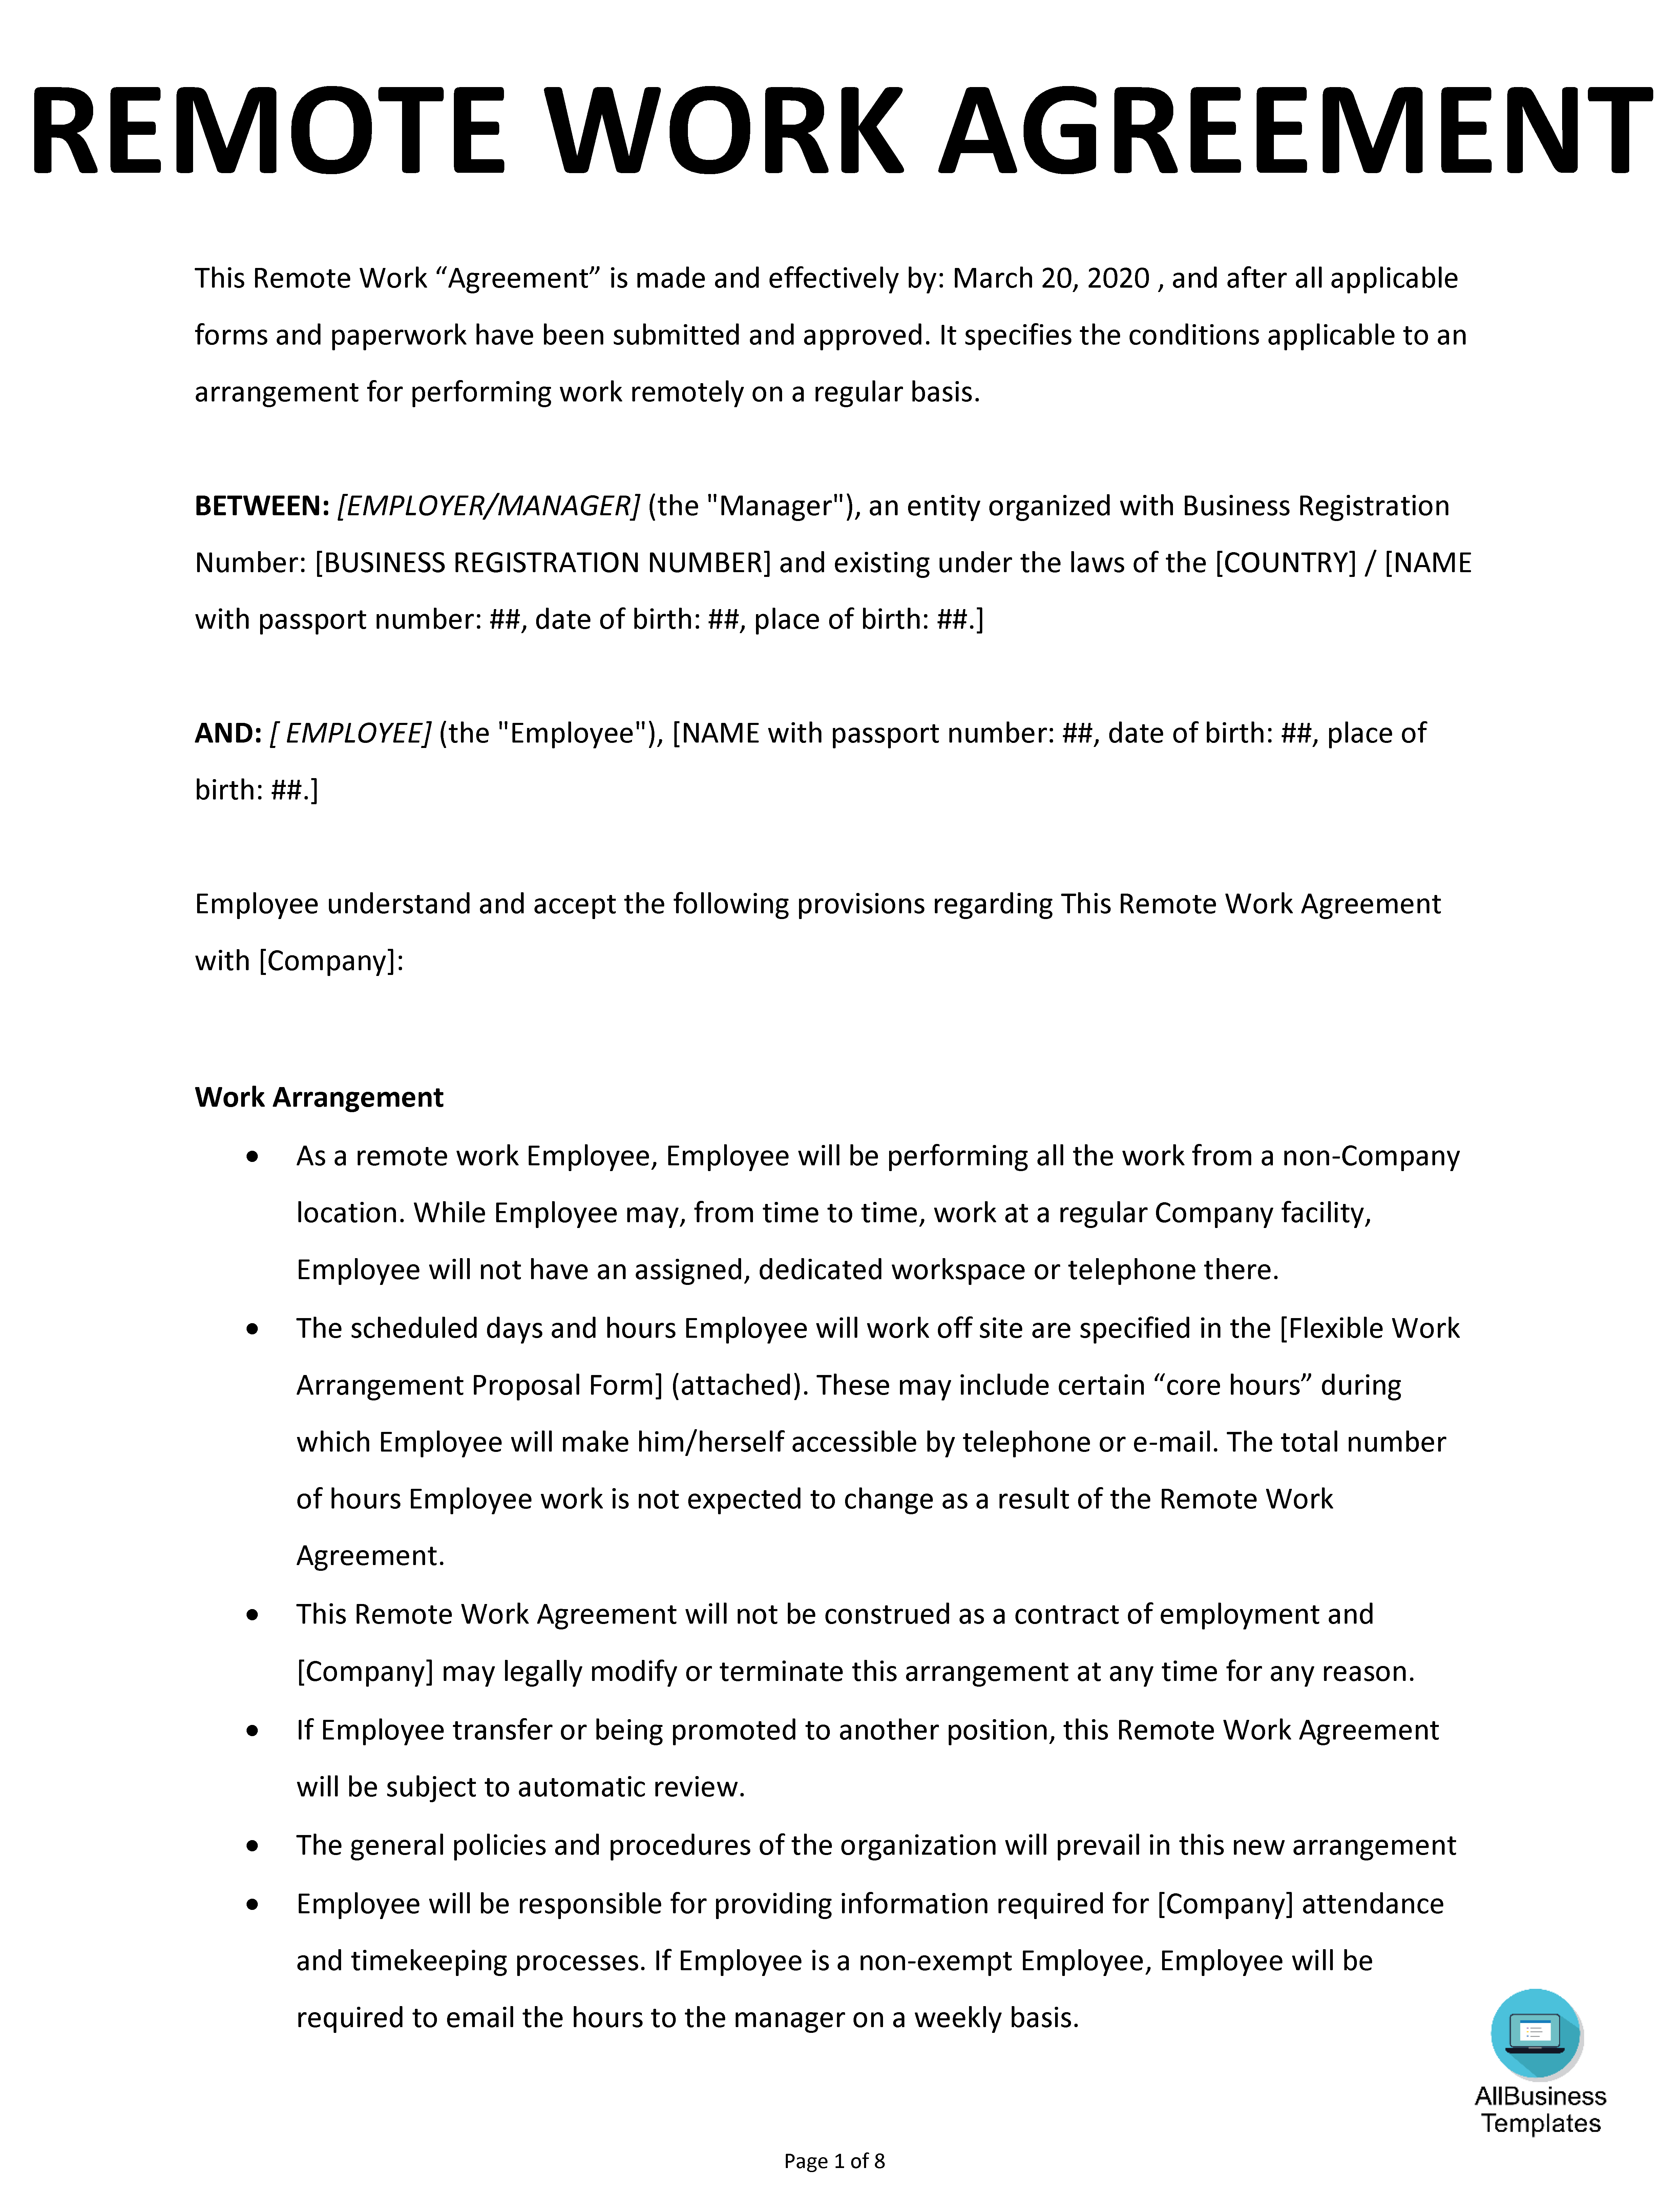 Remote Work Agreement Templates at